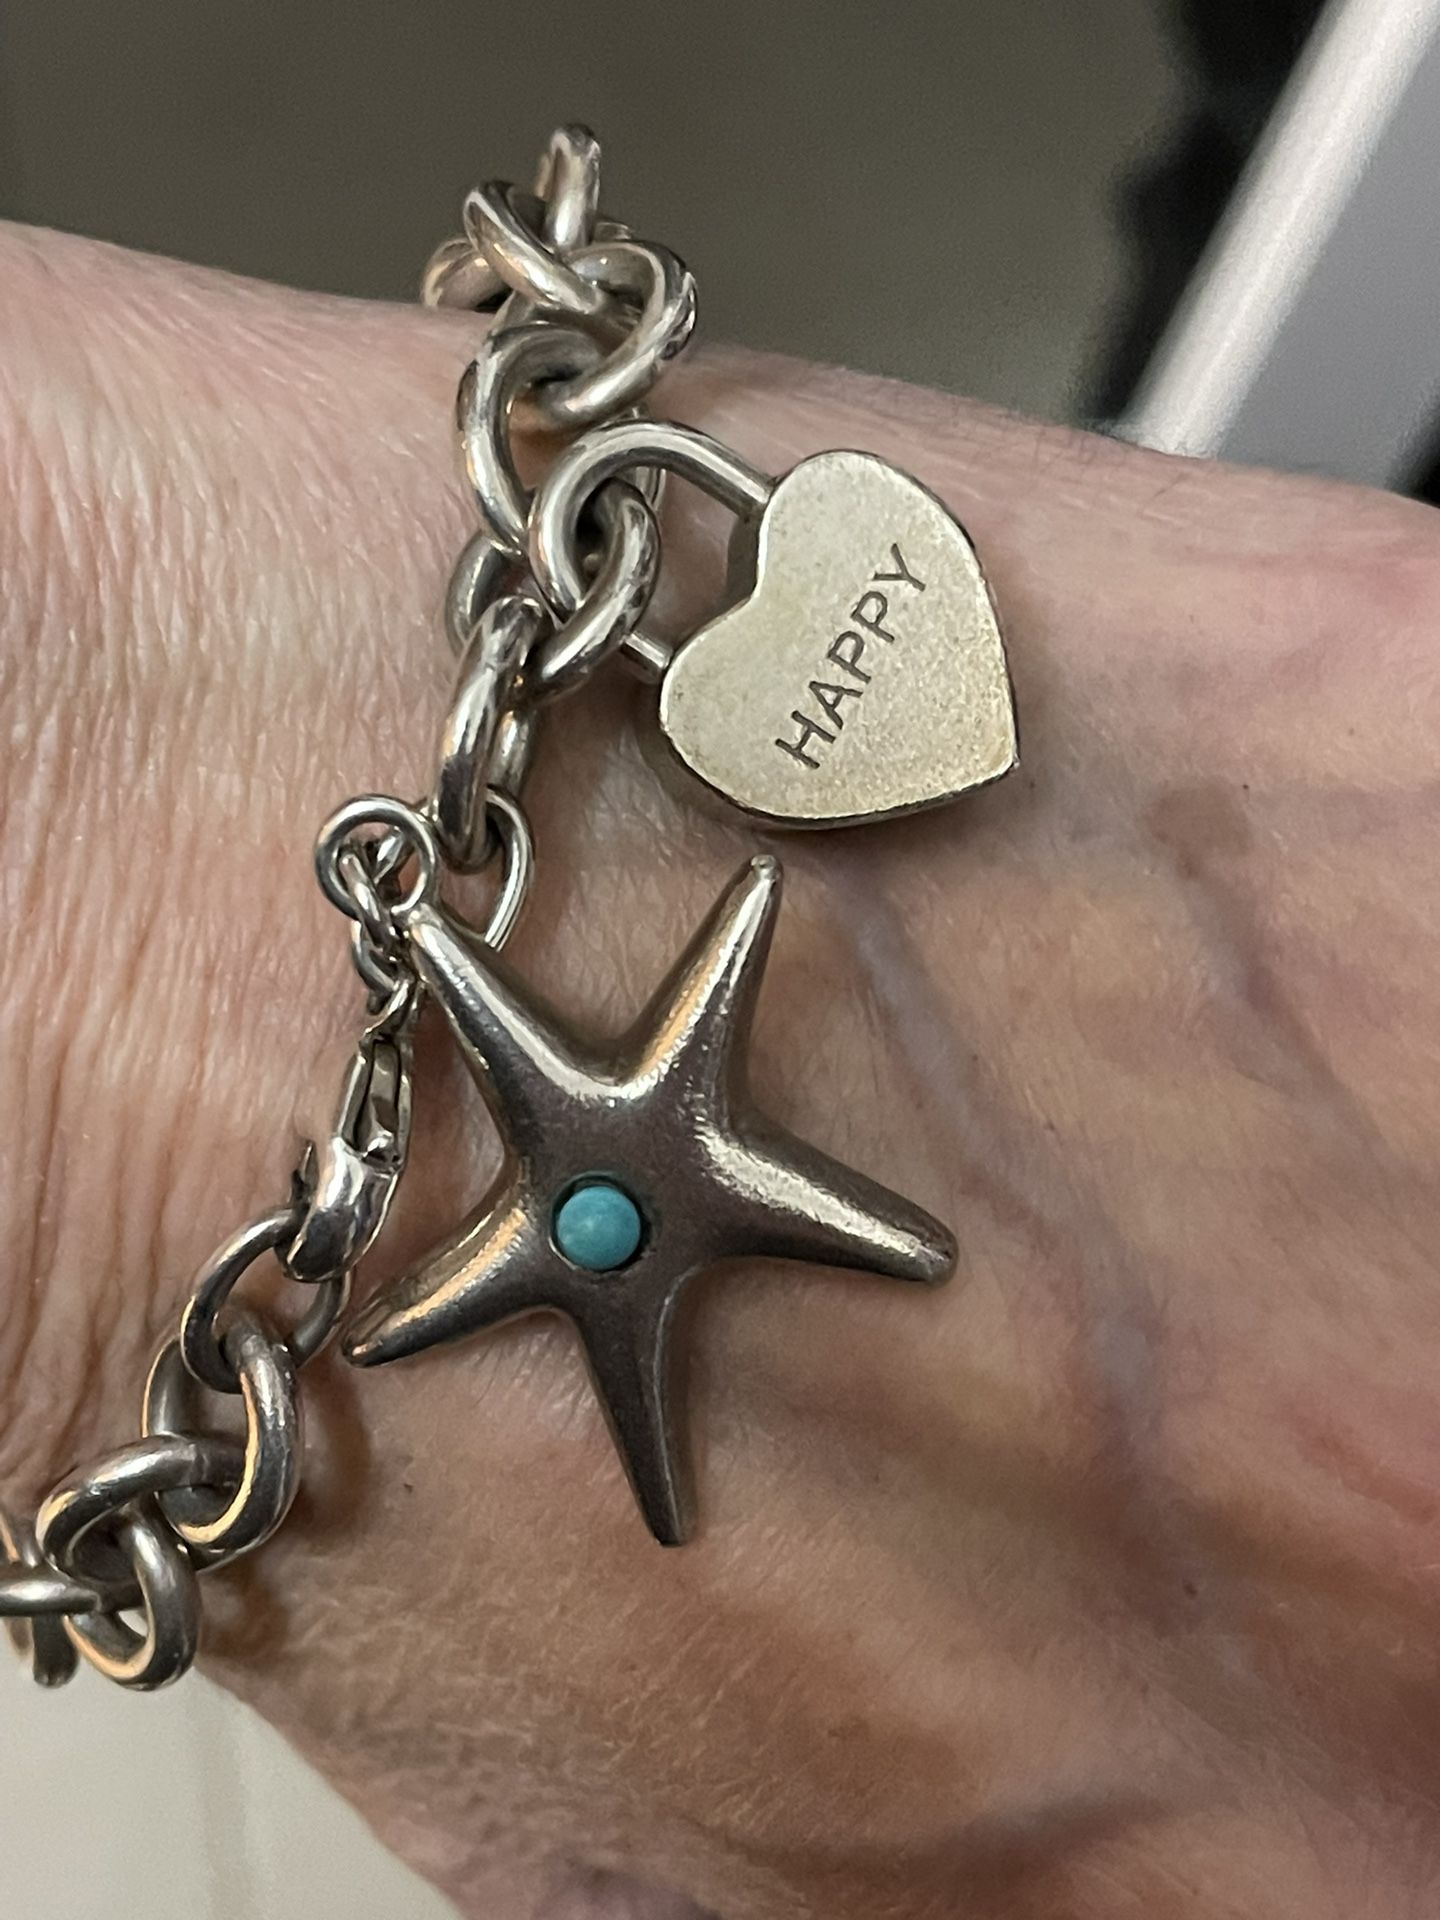 Tiffany & Co Sterling Silver Charm Bracelet- Includes Heart And Star With Turquoise Stone Charms-Reduced To $750 Or Best Offer! 